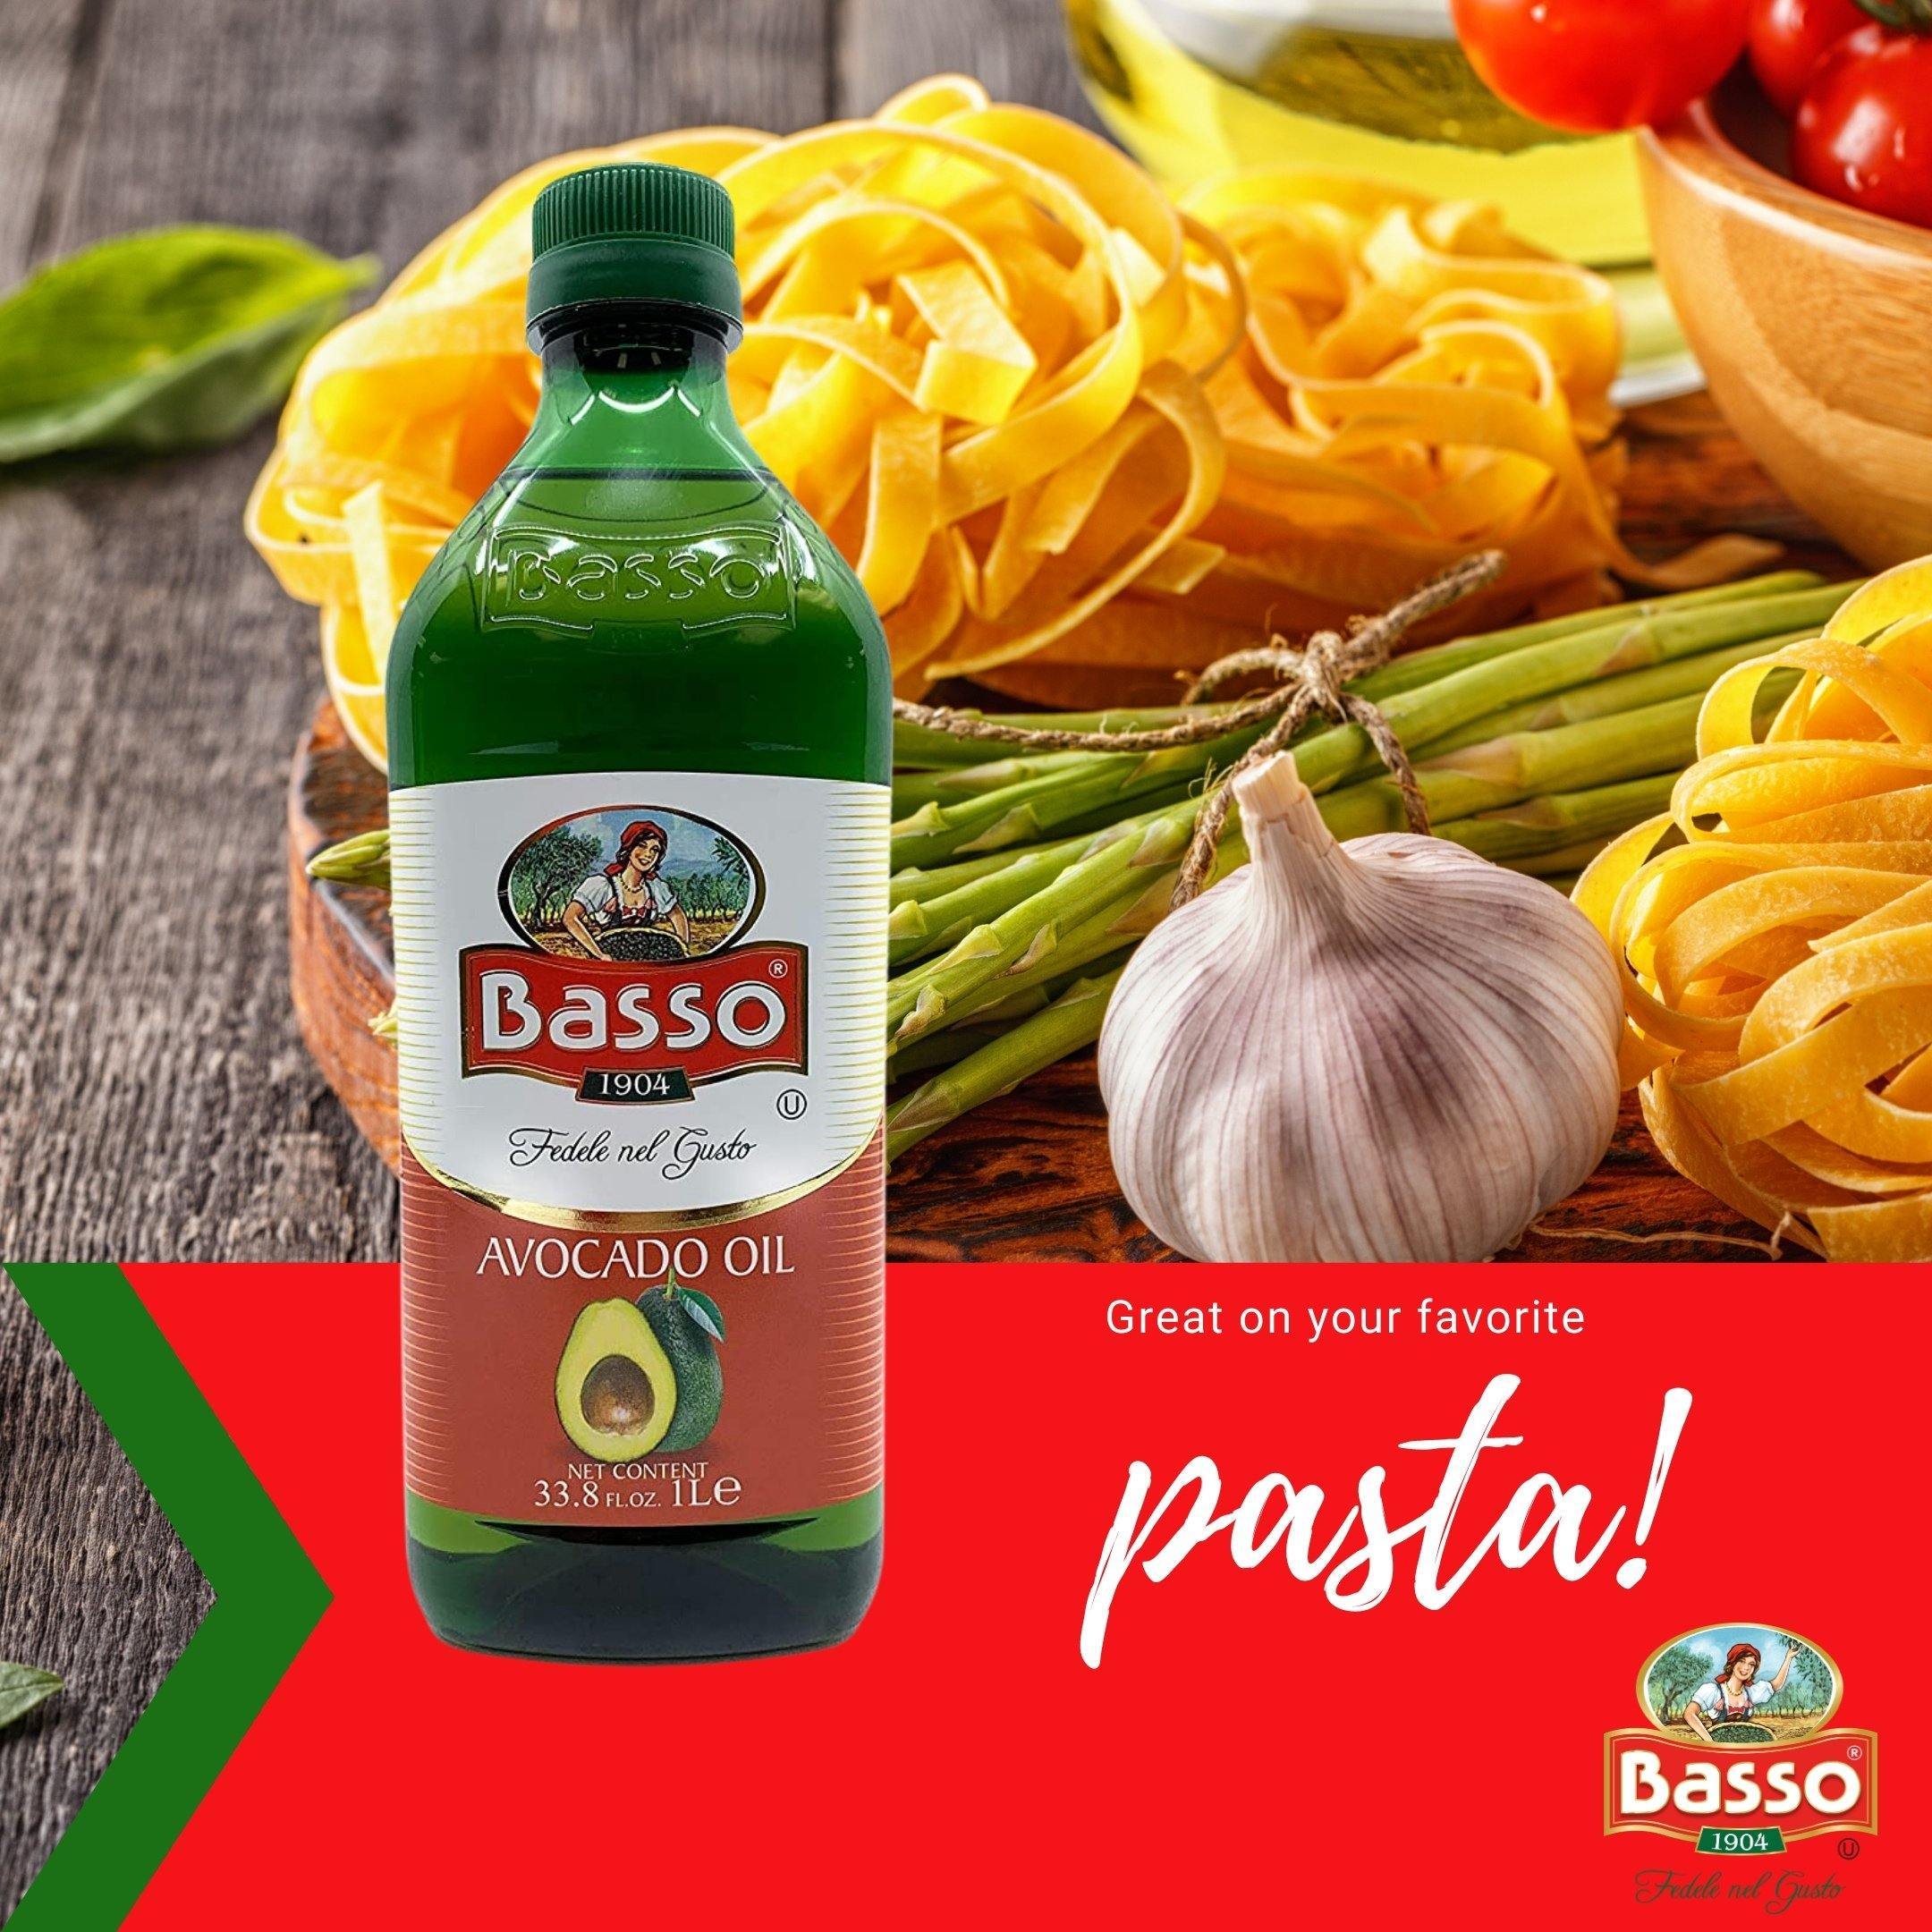 Great for Salads, Pasta and More!